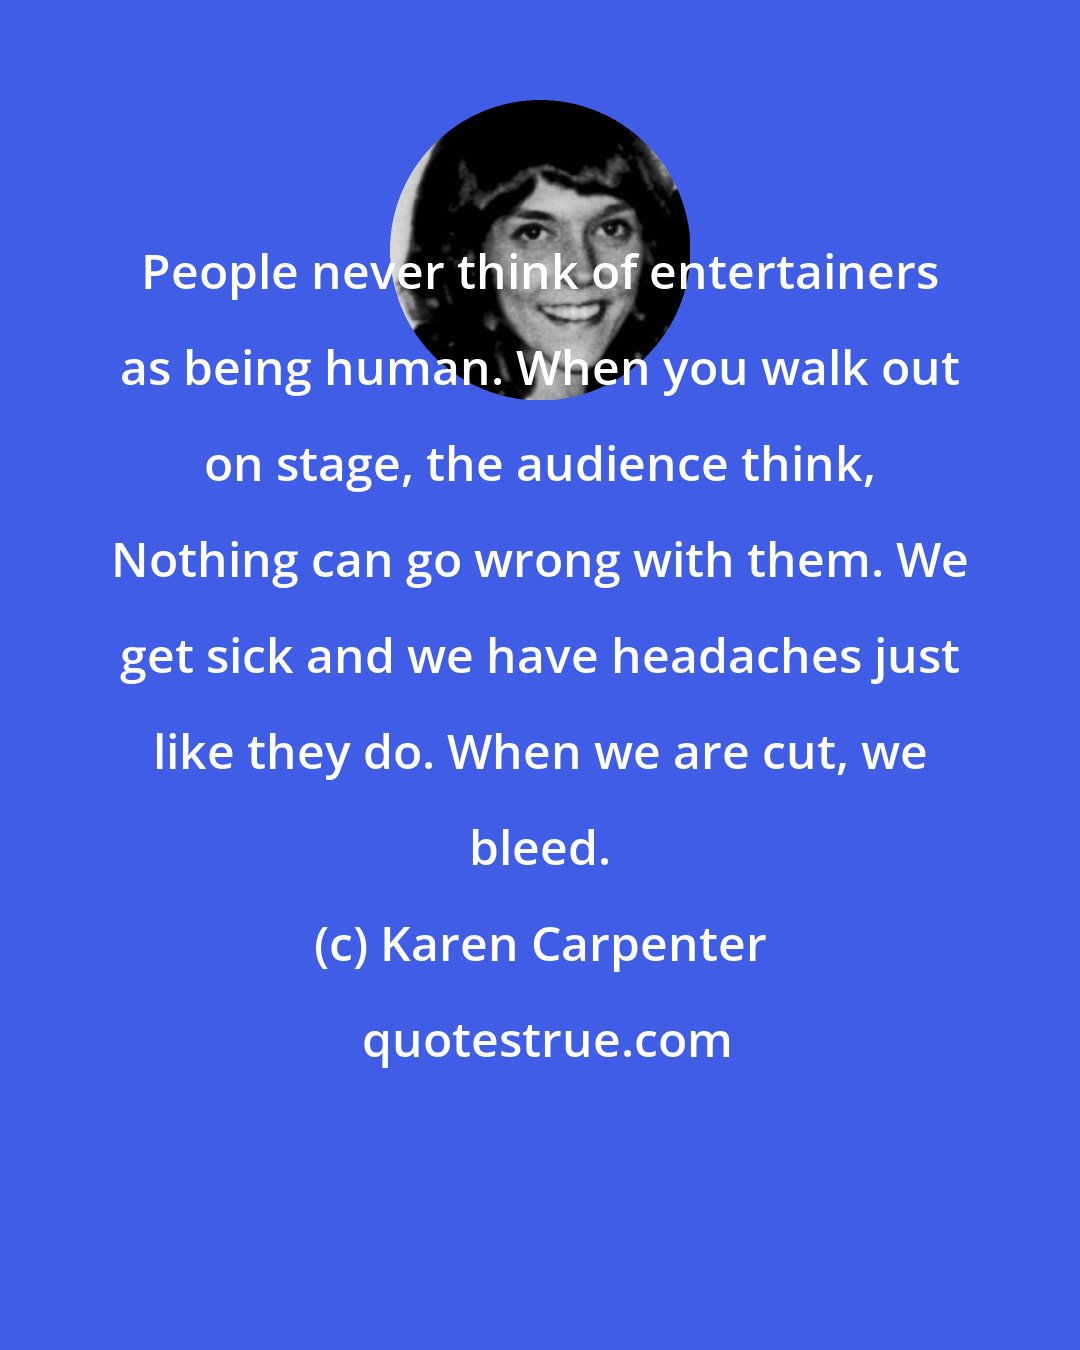 Karen Carpenter: People never think of entertainers as being human. When you walk out on stage, the audience think, Nothing can go wrong with them. We get sick and we have headaches just like they do. When we are cut, we bleed.